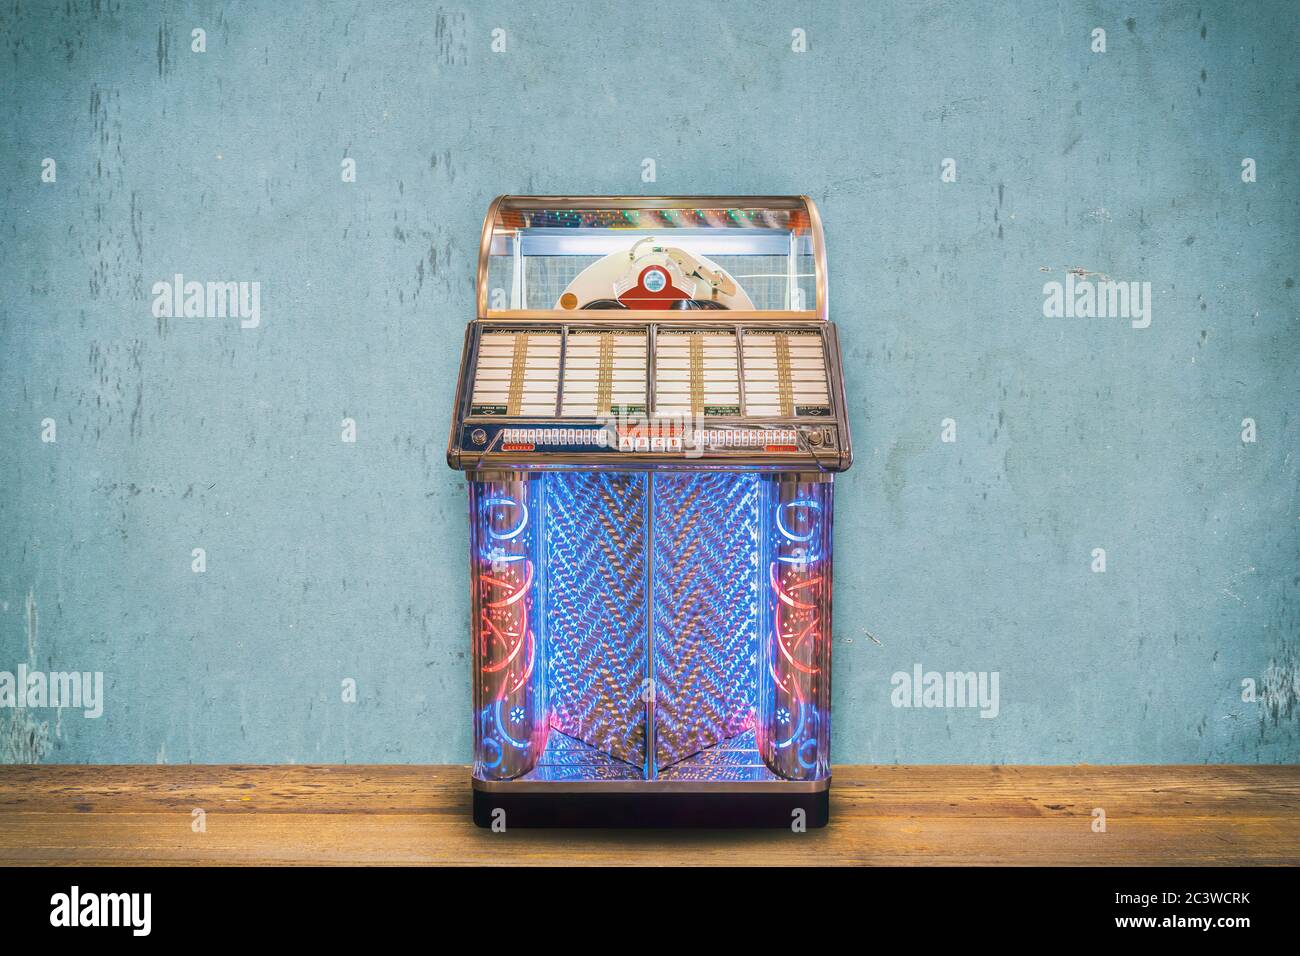 Colorful vintage jukebox in front of a blue weathered wall on a wooden floor Stock Photo